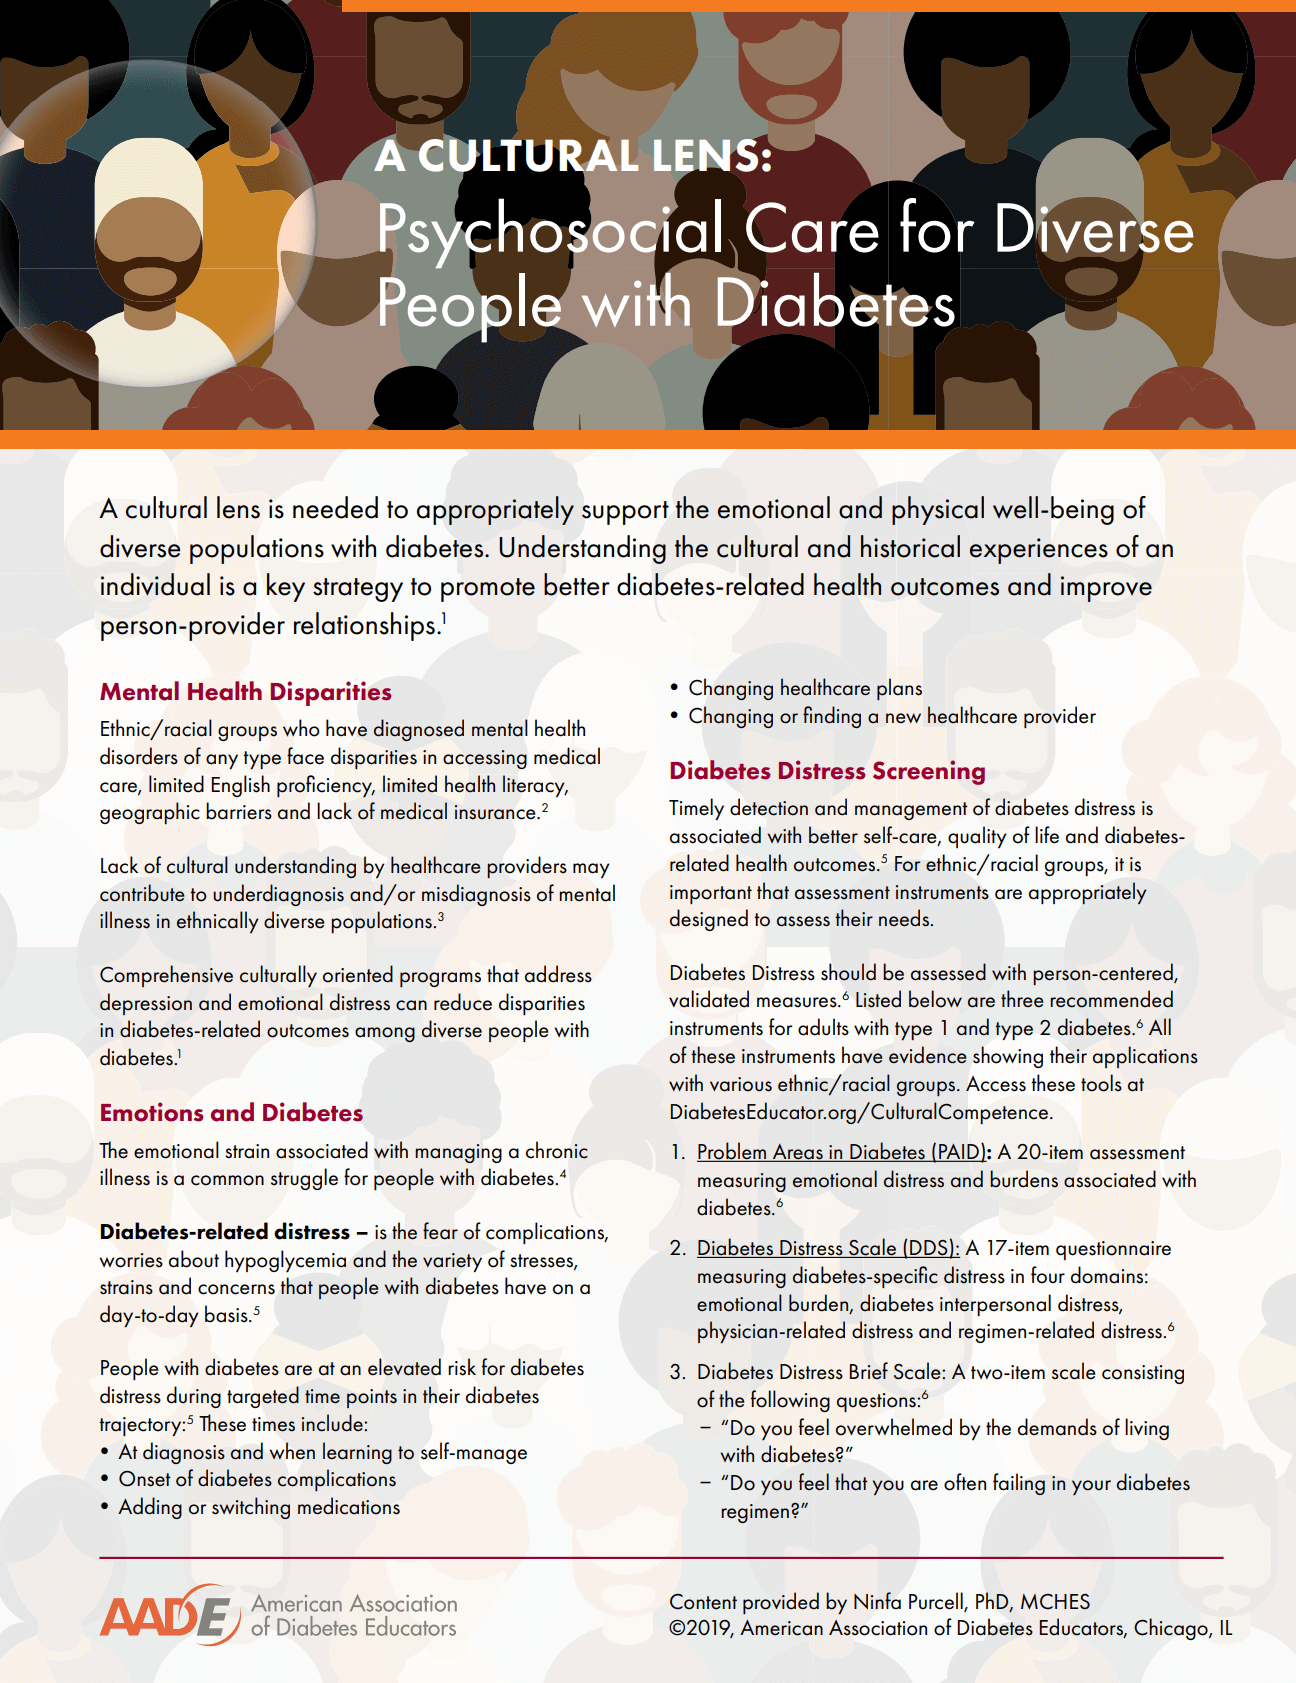 Psychosocial Care for Diverse People with Diabetes